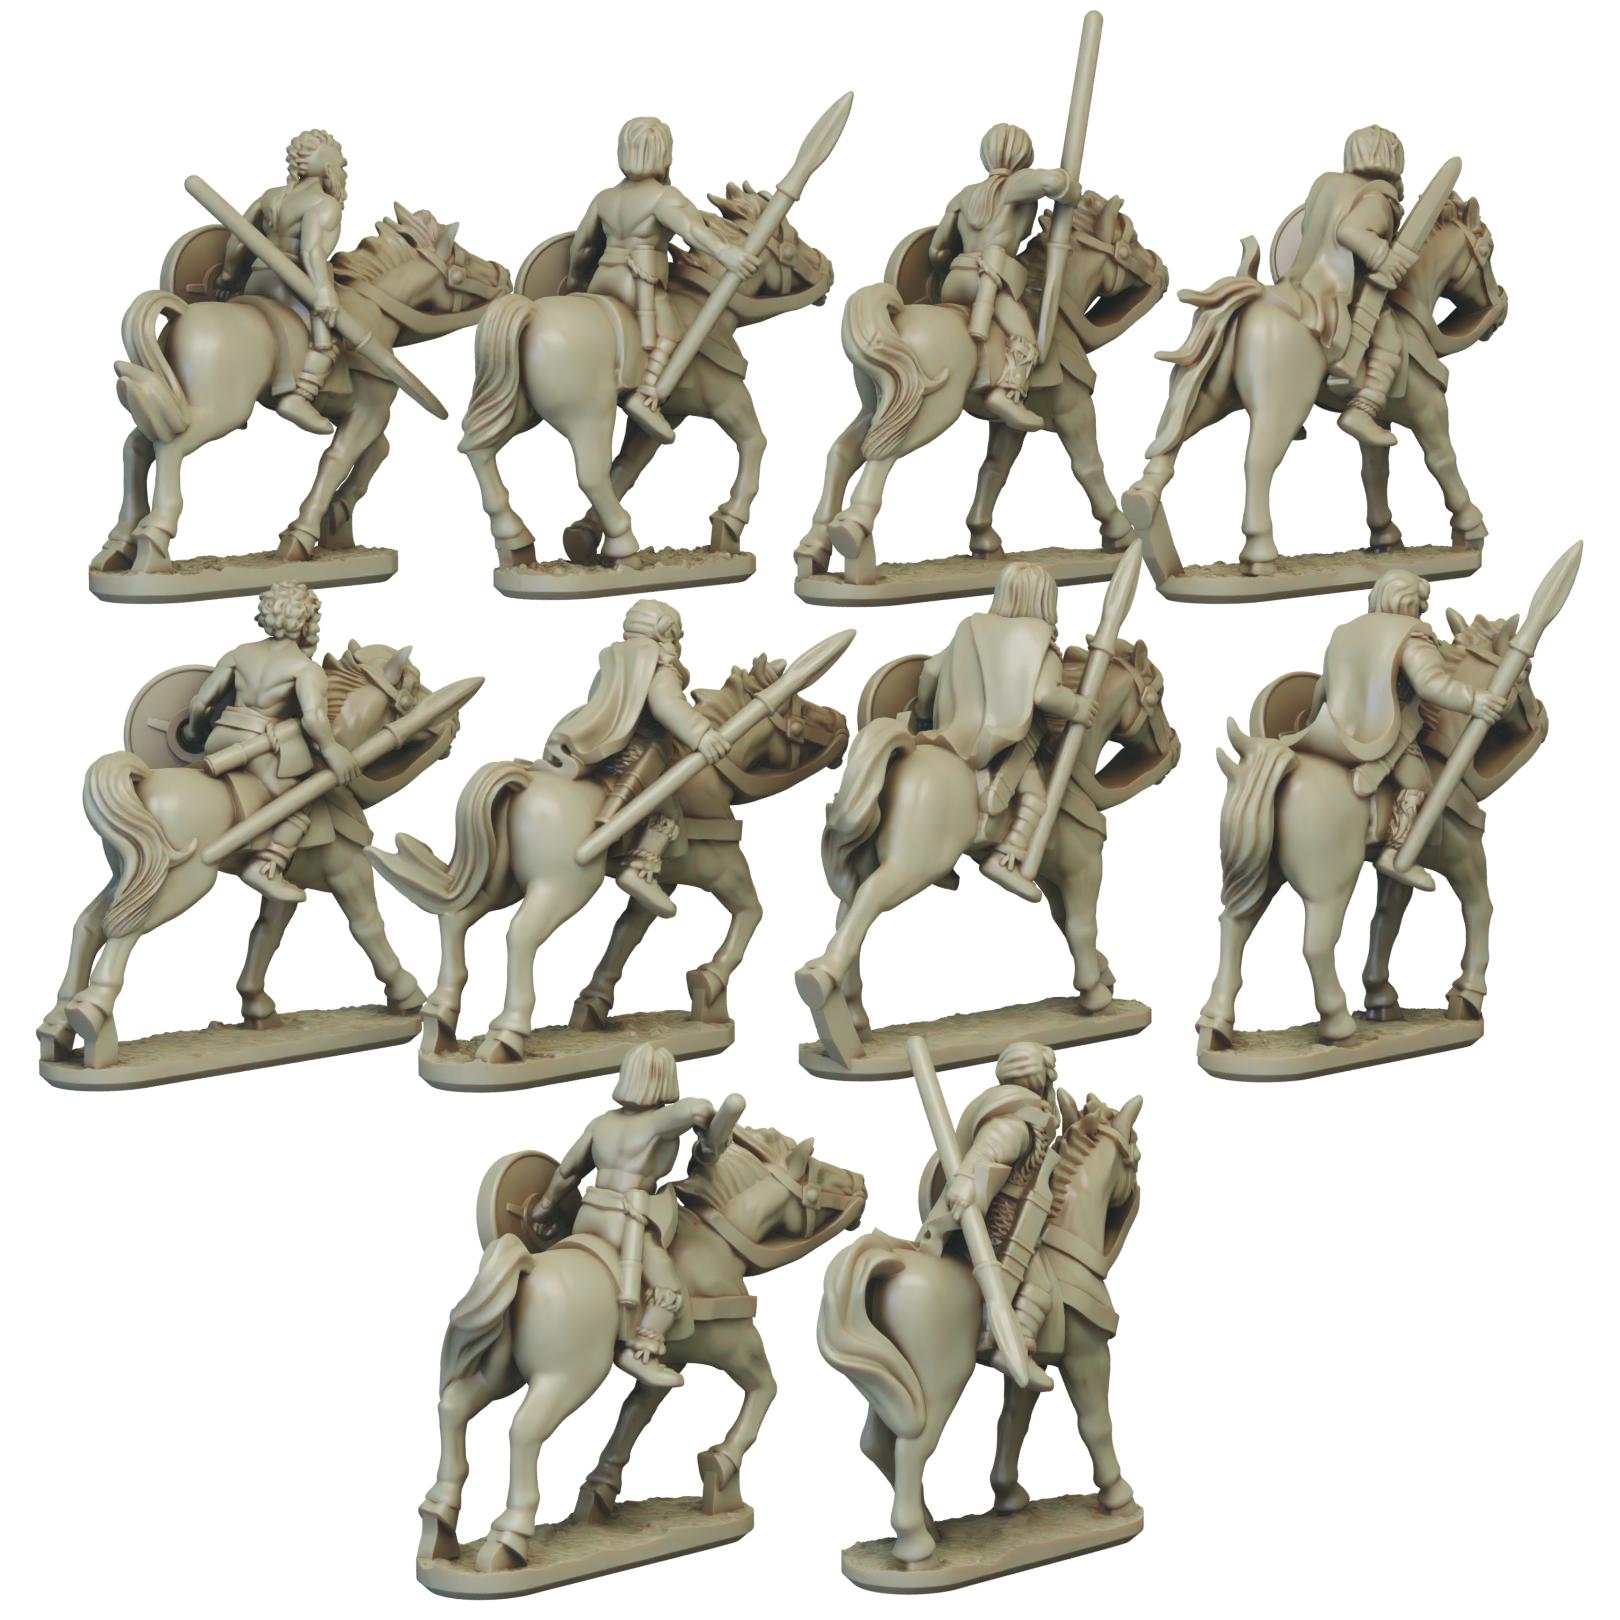 Cavalry back all render